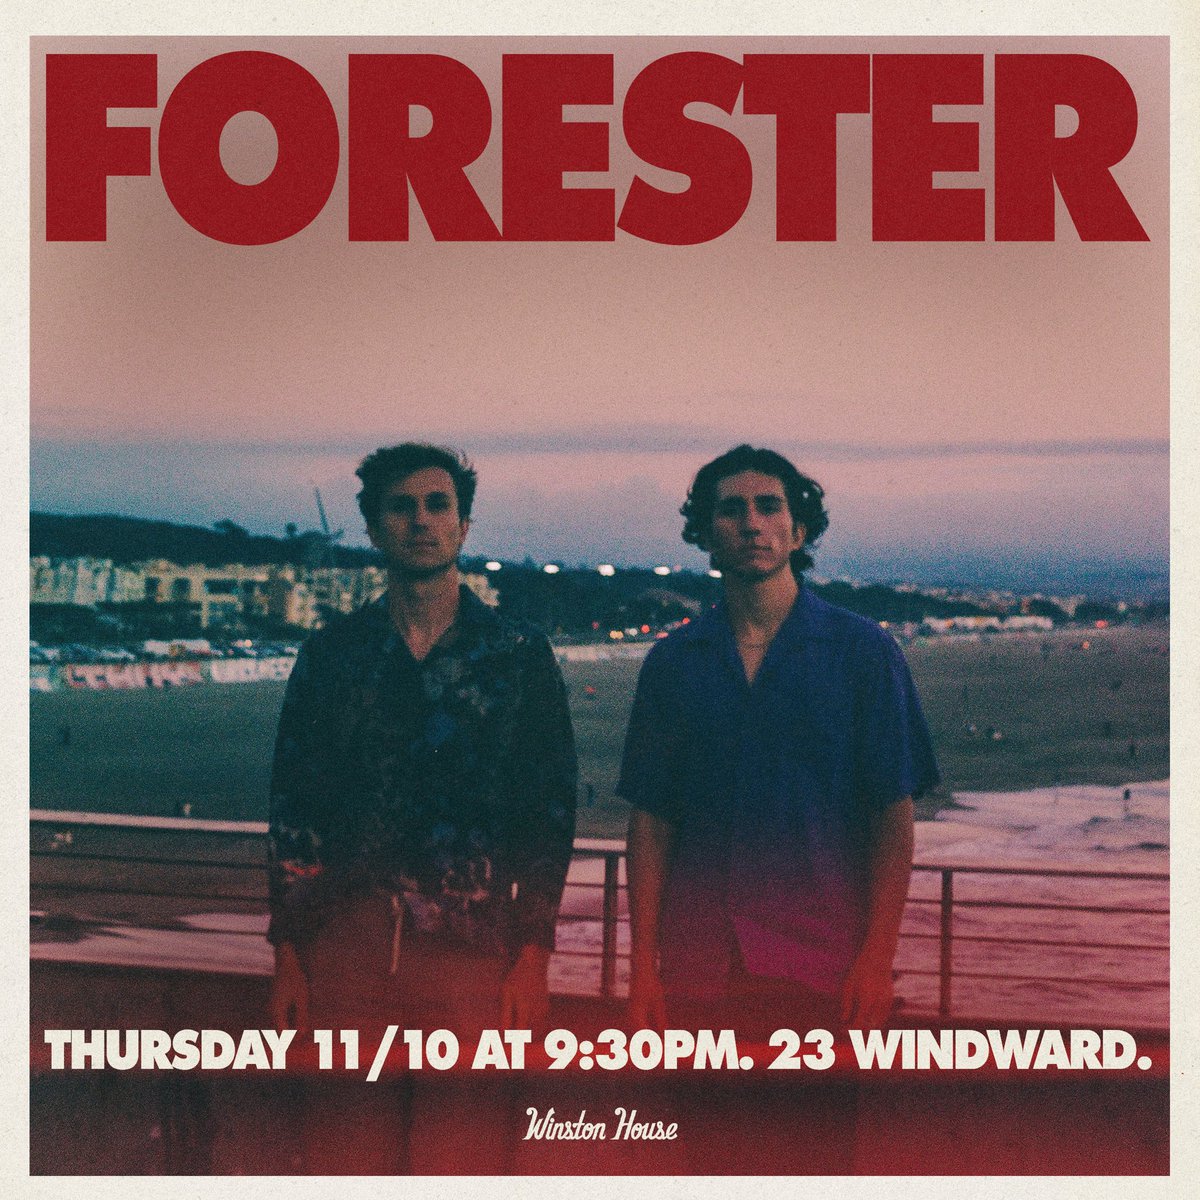 We’re playing a live set at Winston House tonight in Venice… come hang out. RSVP here: winstonhouse.com/rsvp-forester